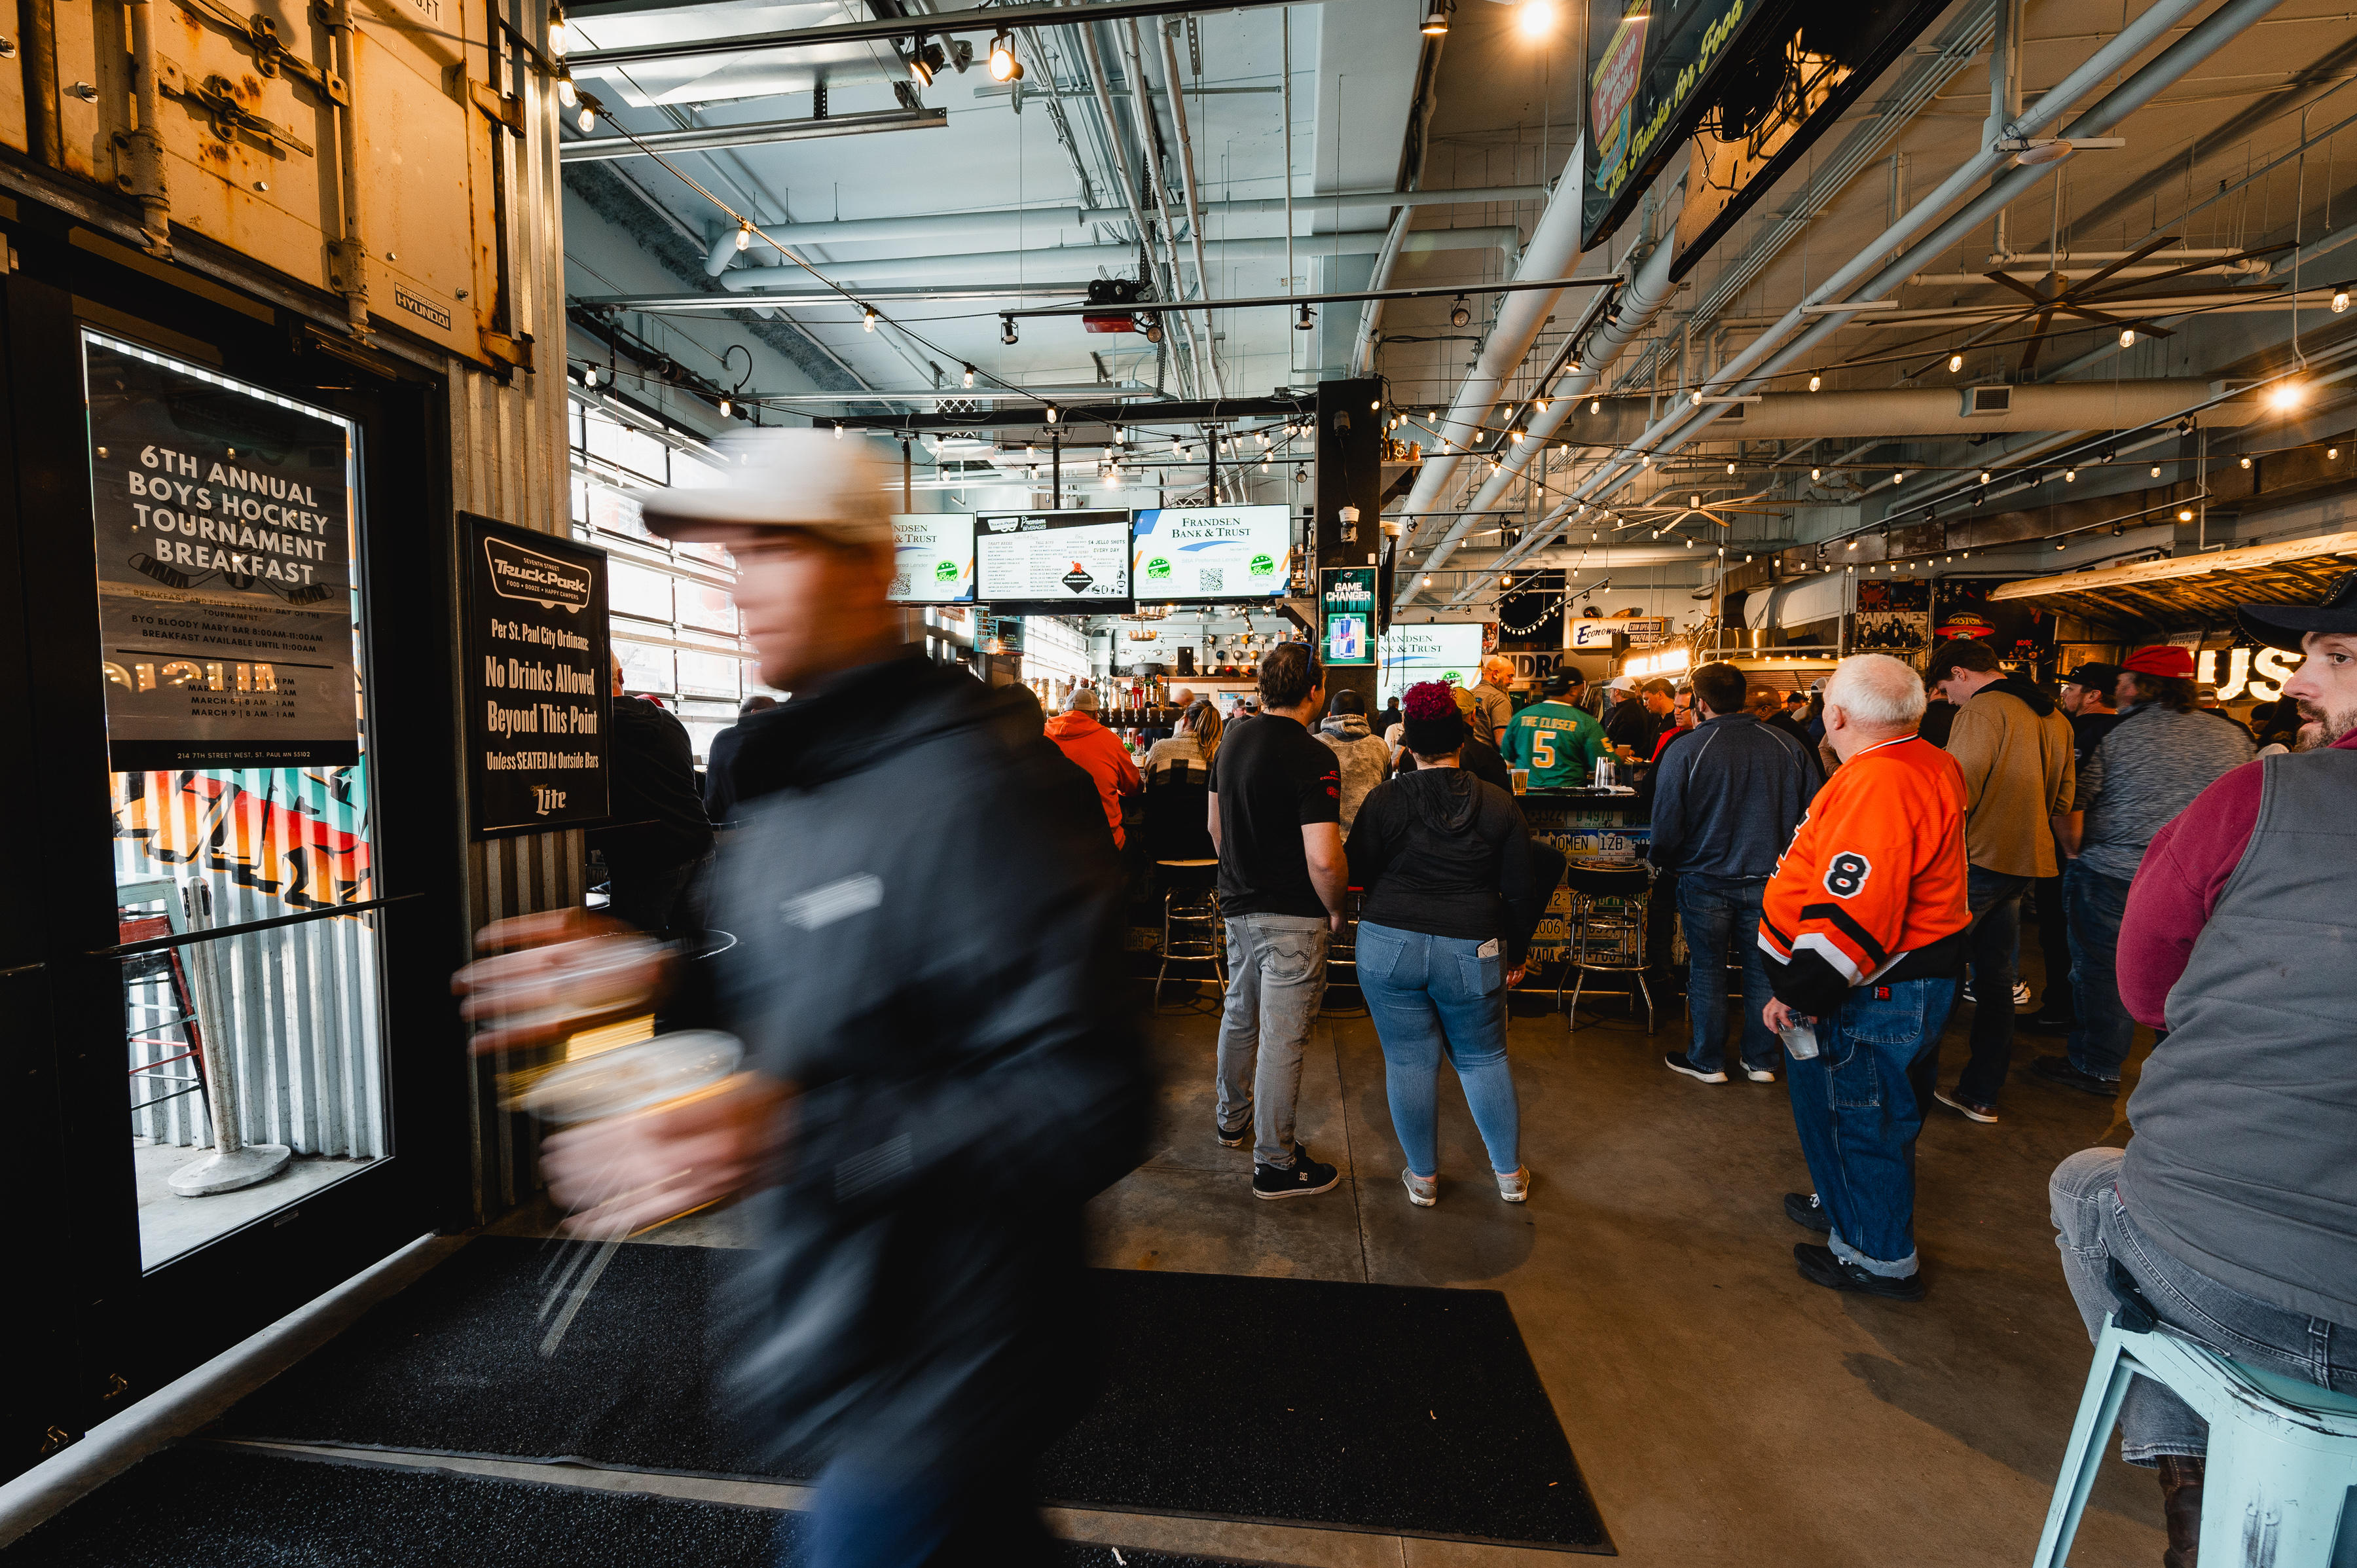 Truck Park is a great place to come for Food and Drinks before or after any event at the Xcel Energy Center